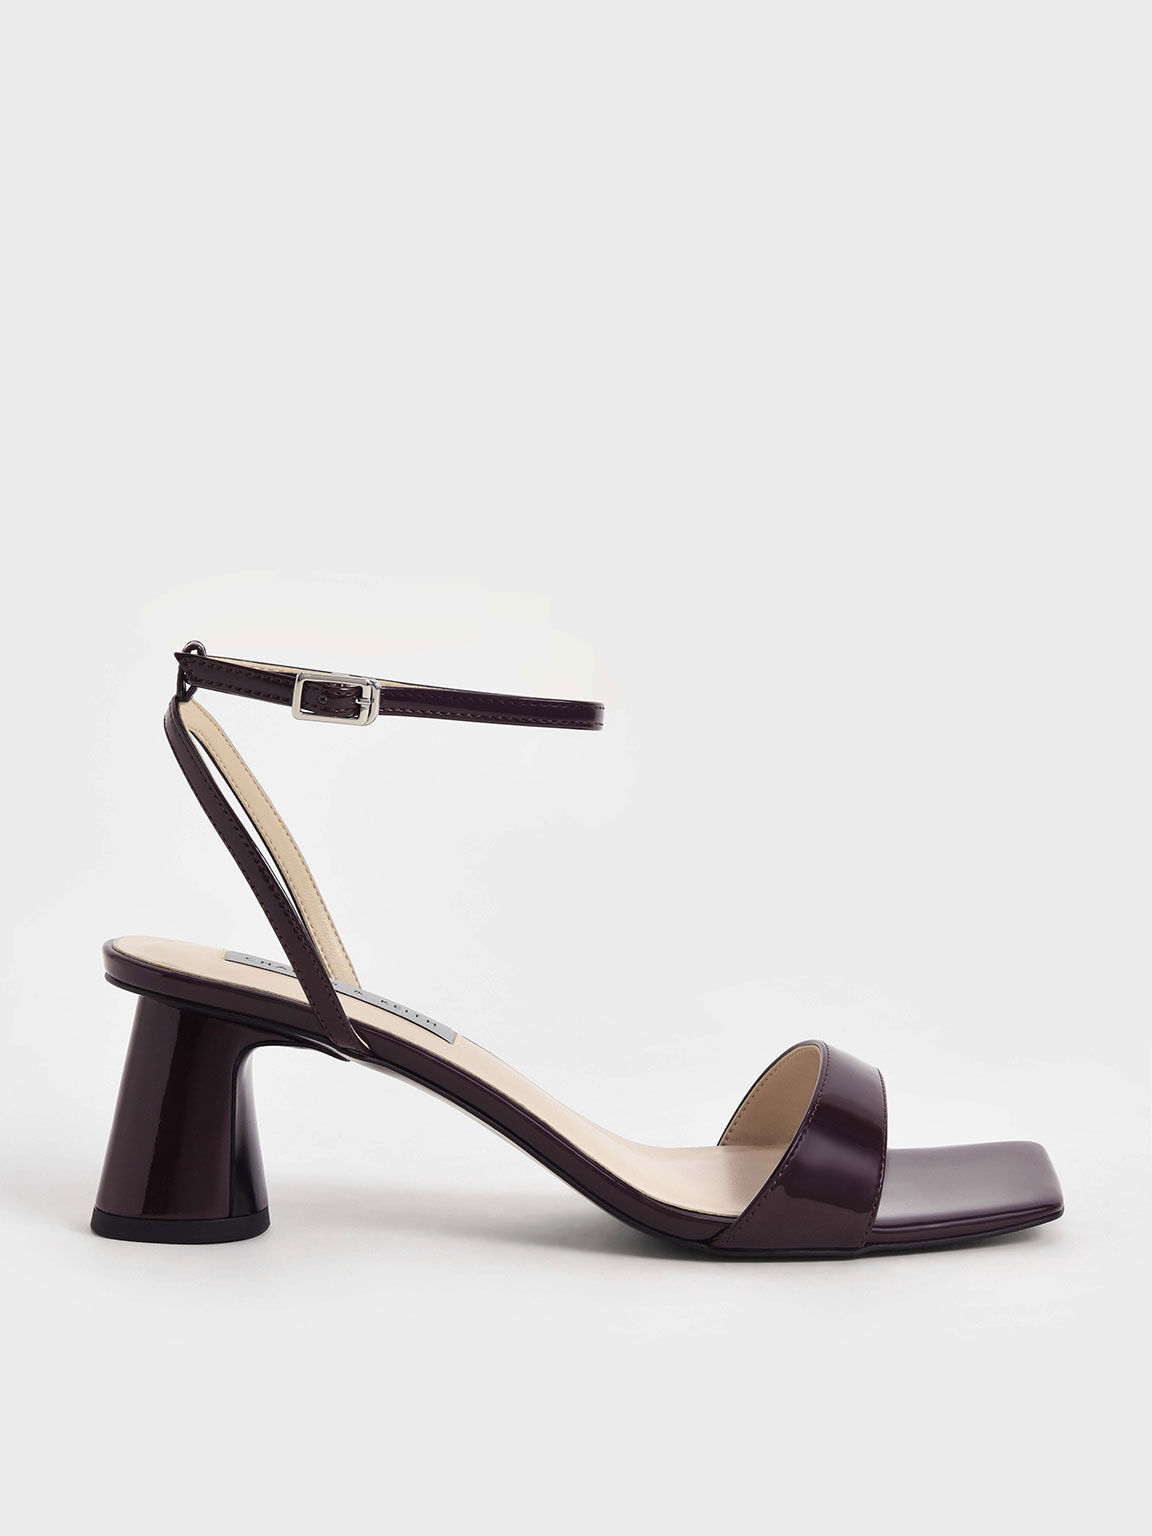 Patent Ankle-Strap Cylindrical Heel Sandals, Maroon, hi-res